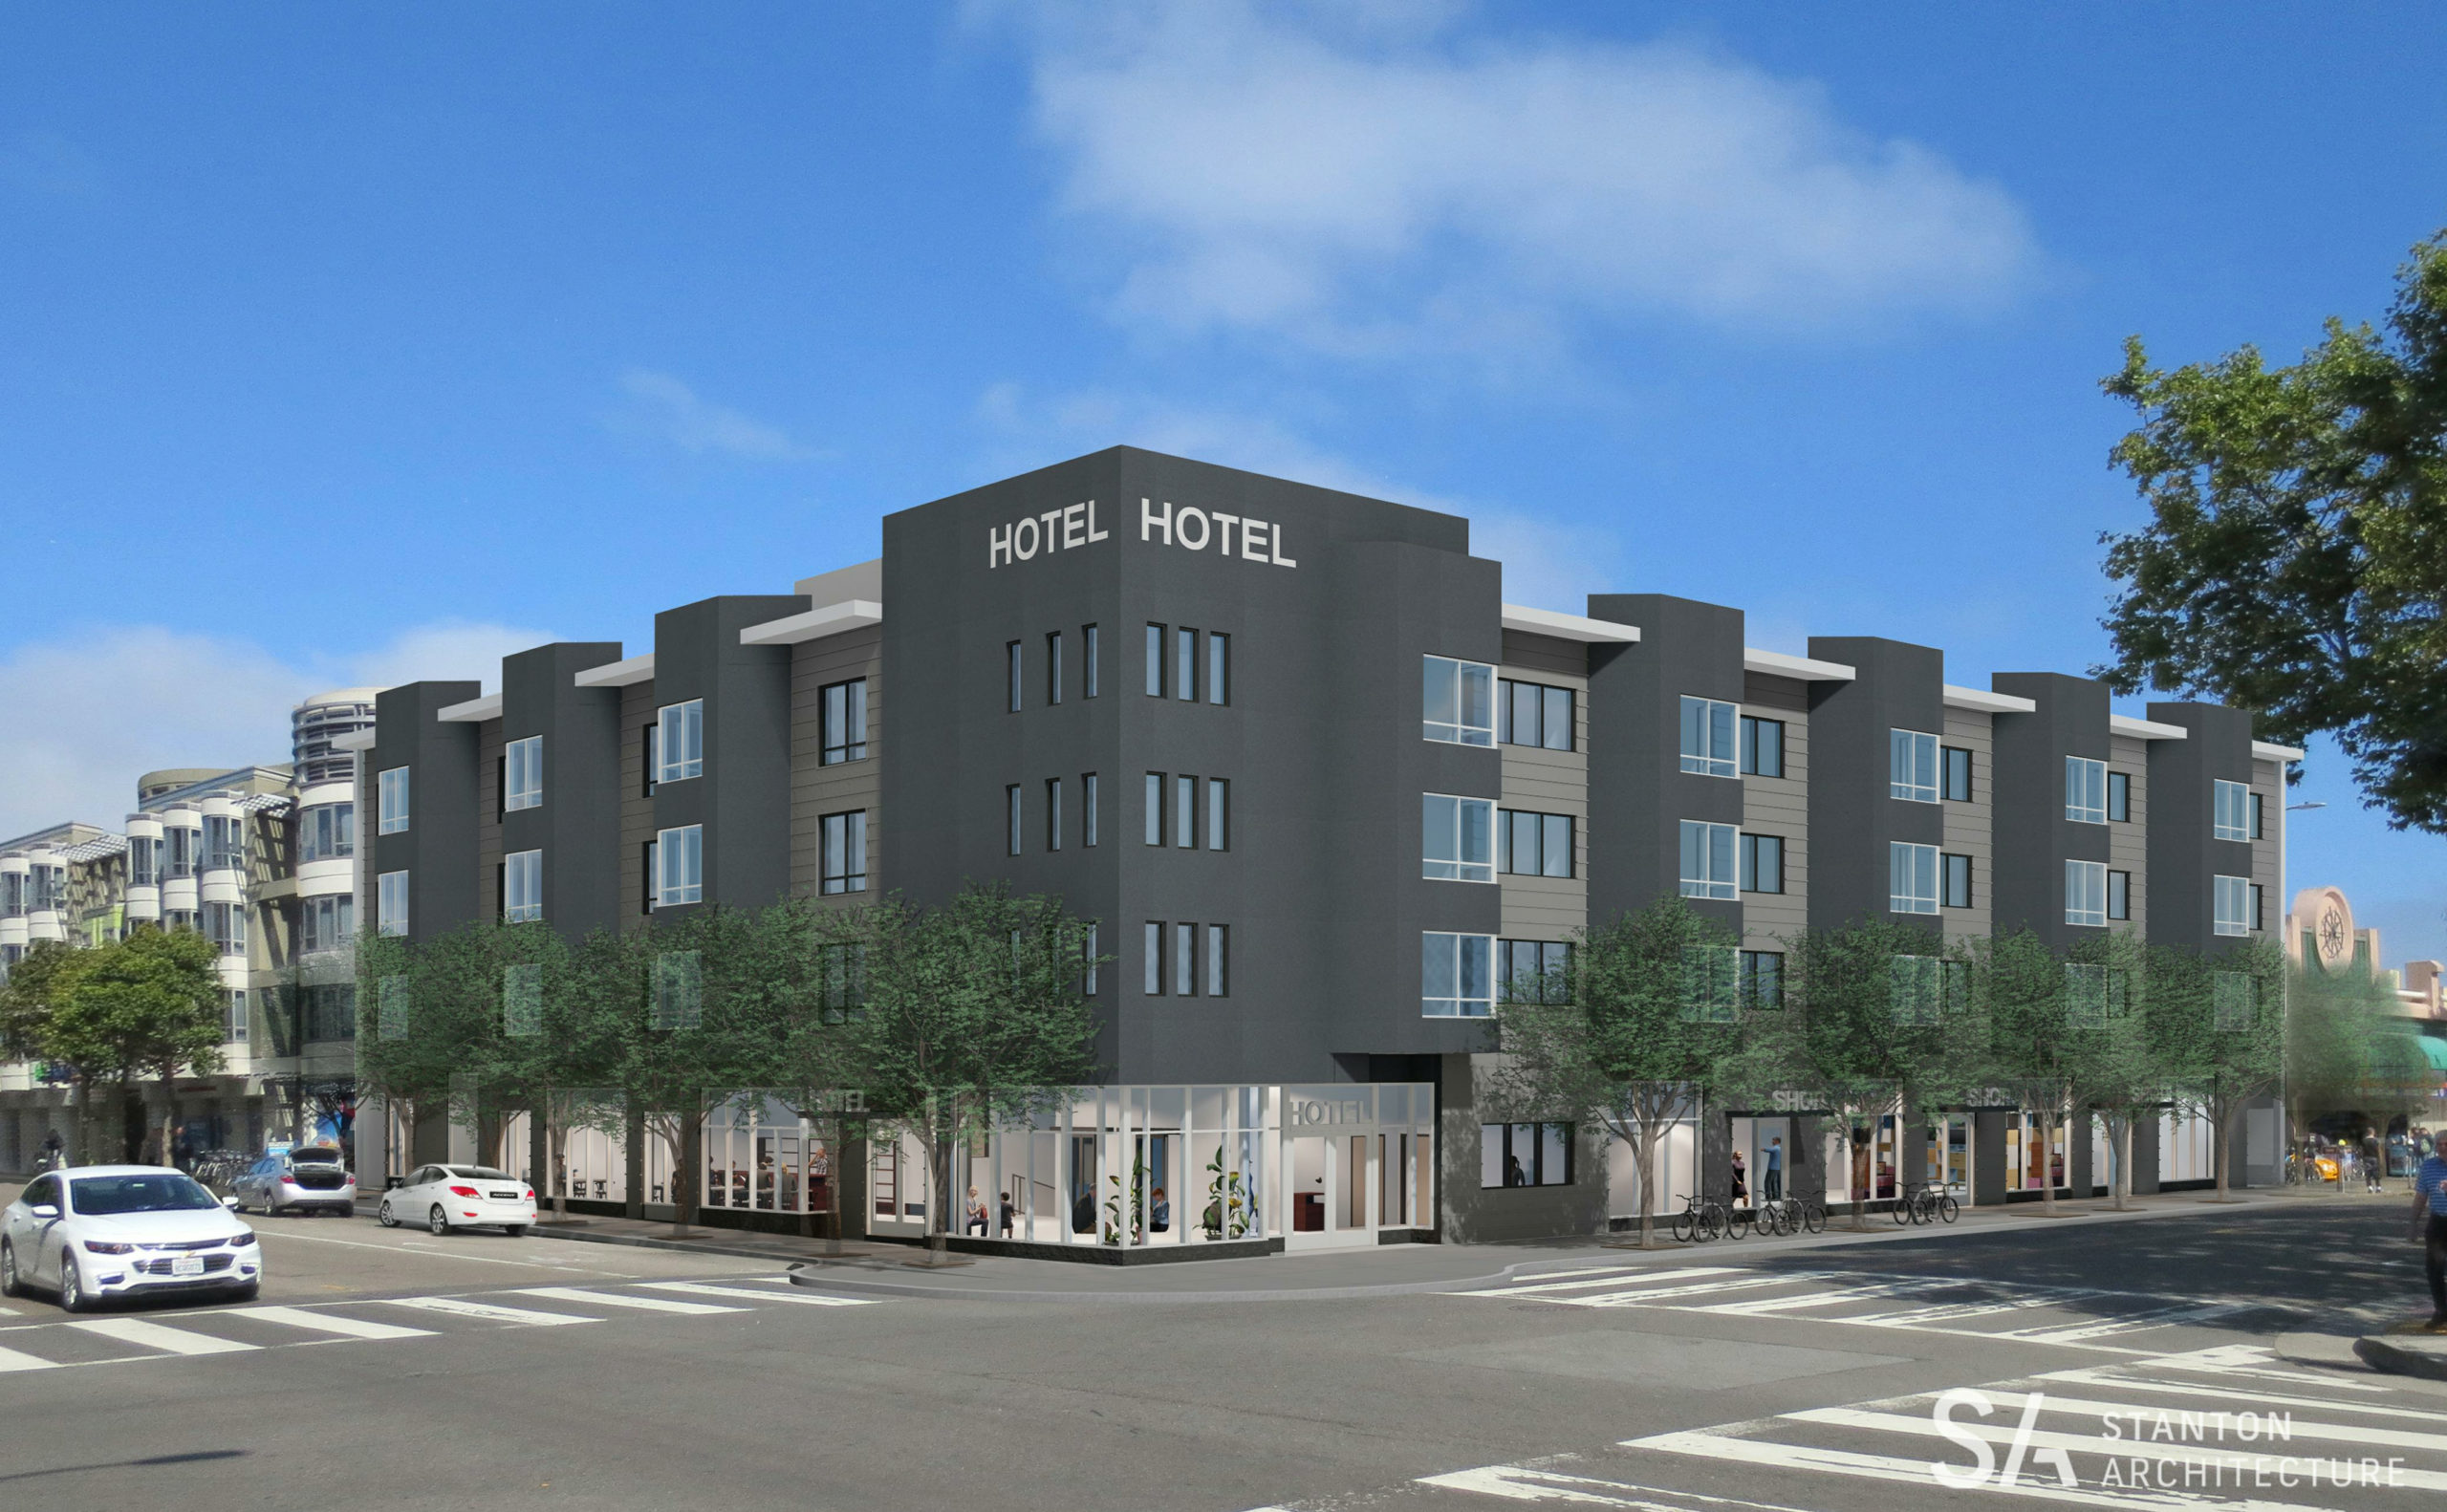 2629 Taylor Street hotel, rendering by Stanton Architecture